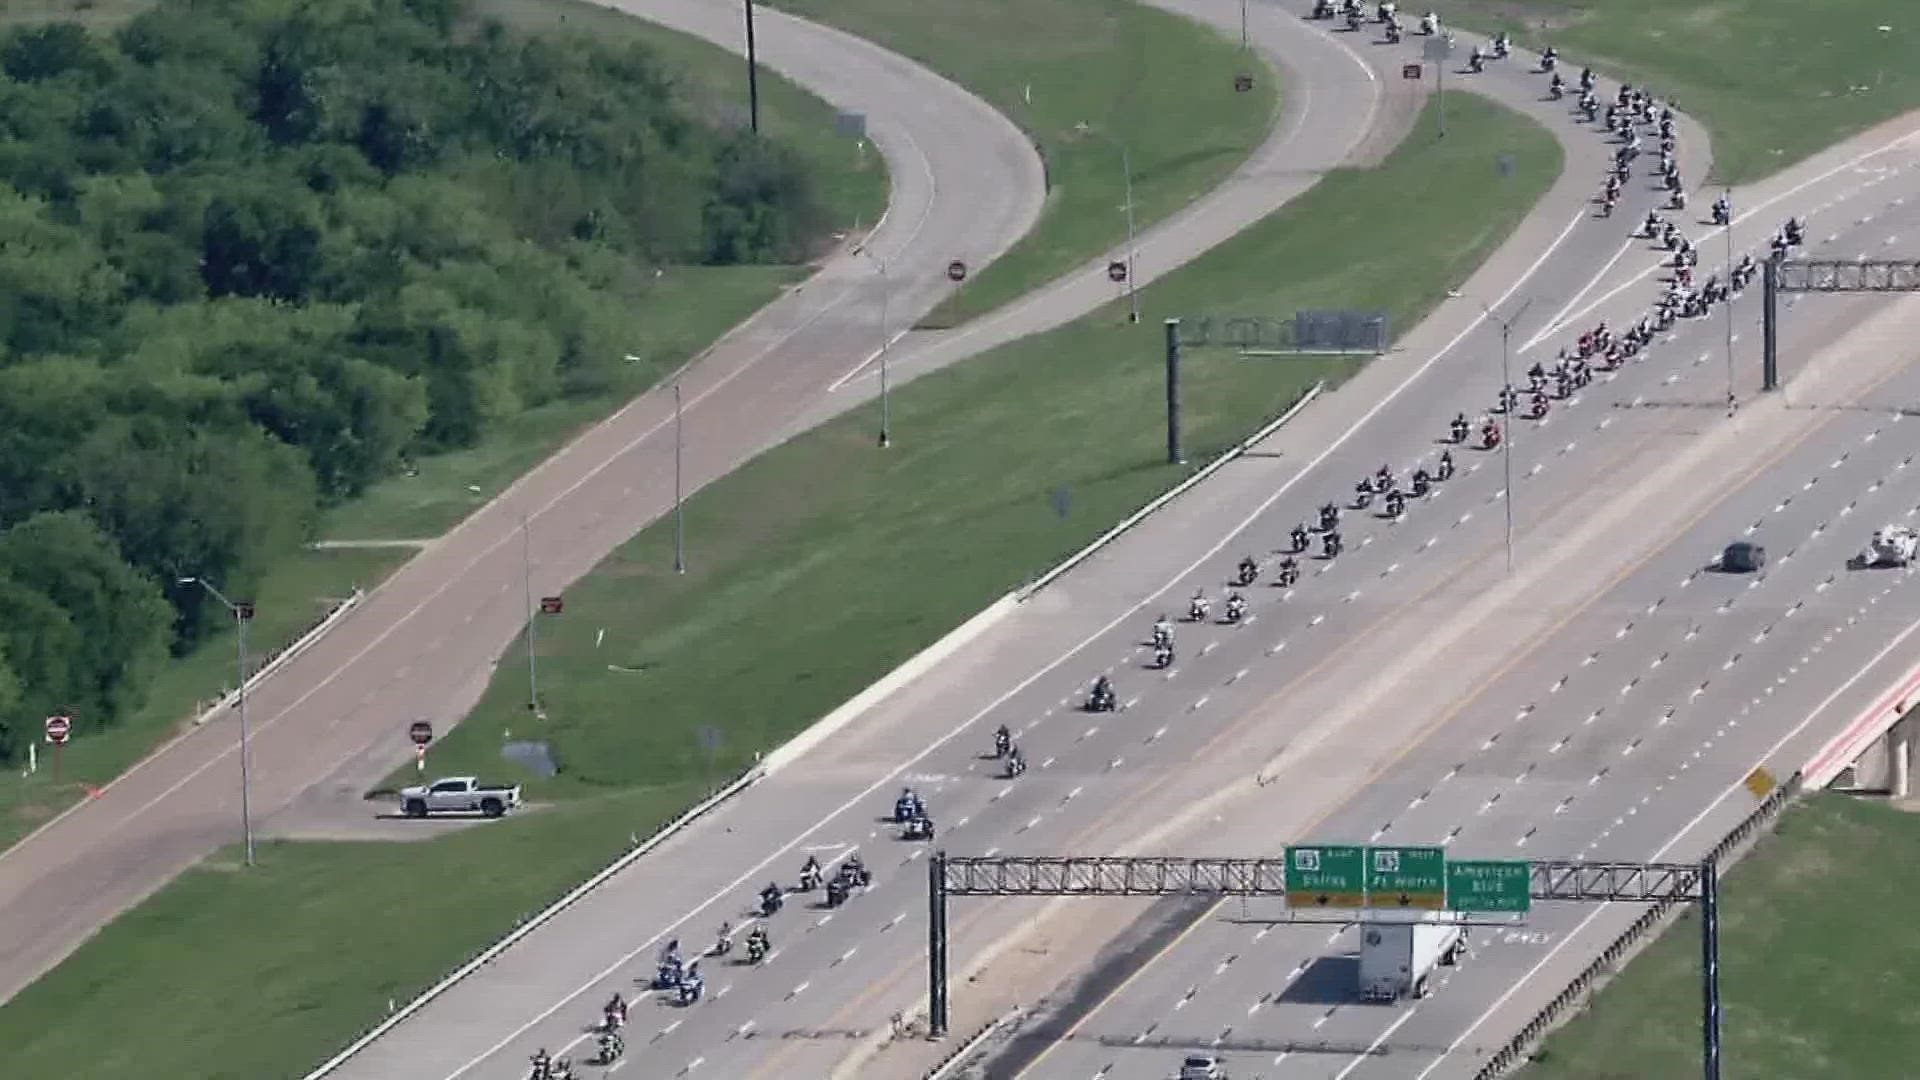 With more than 500 vehicles on display, the 14th annual Congressional Medal of Honor Recipient Motorcade was back in North Texas Wednesday.